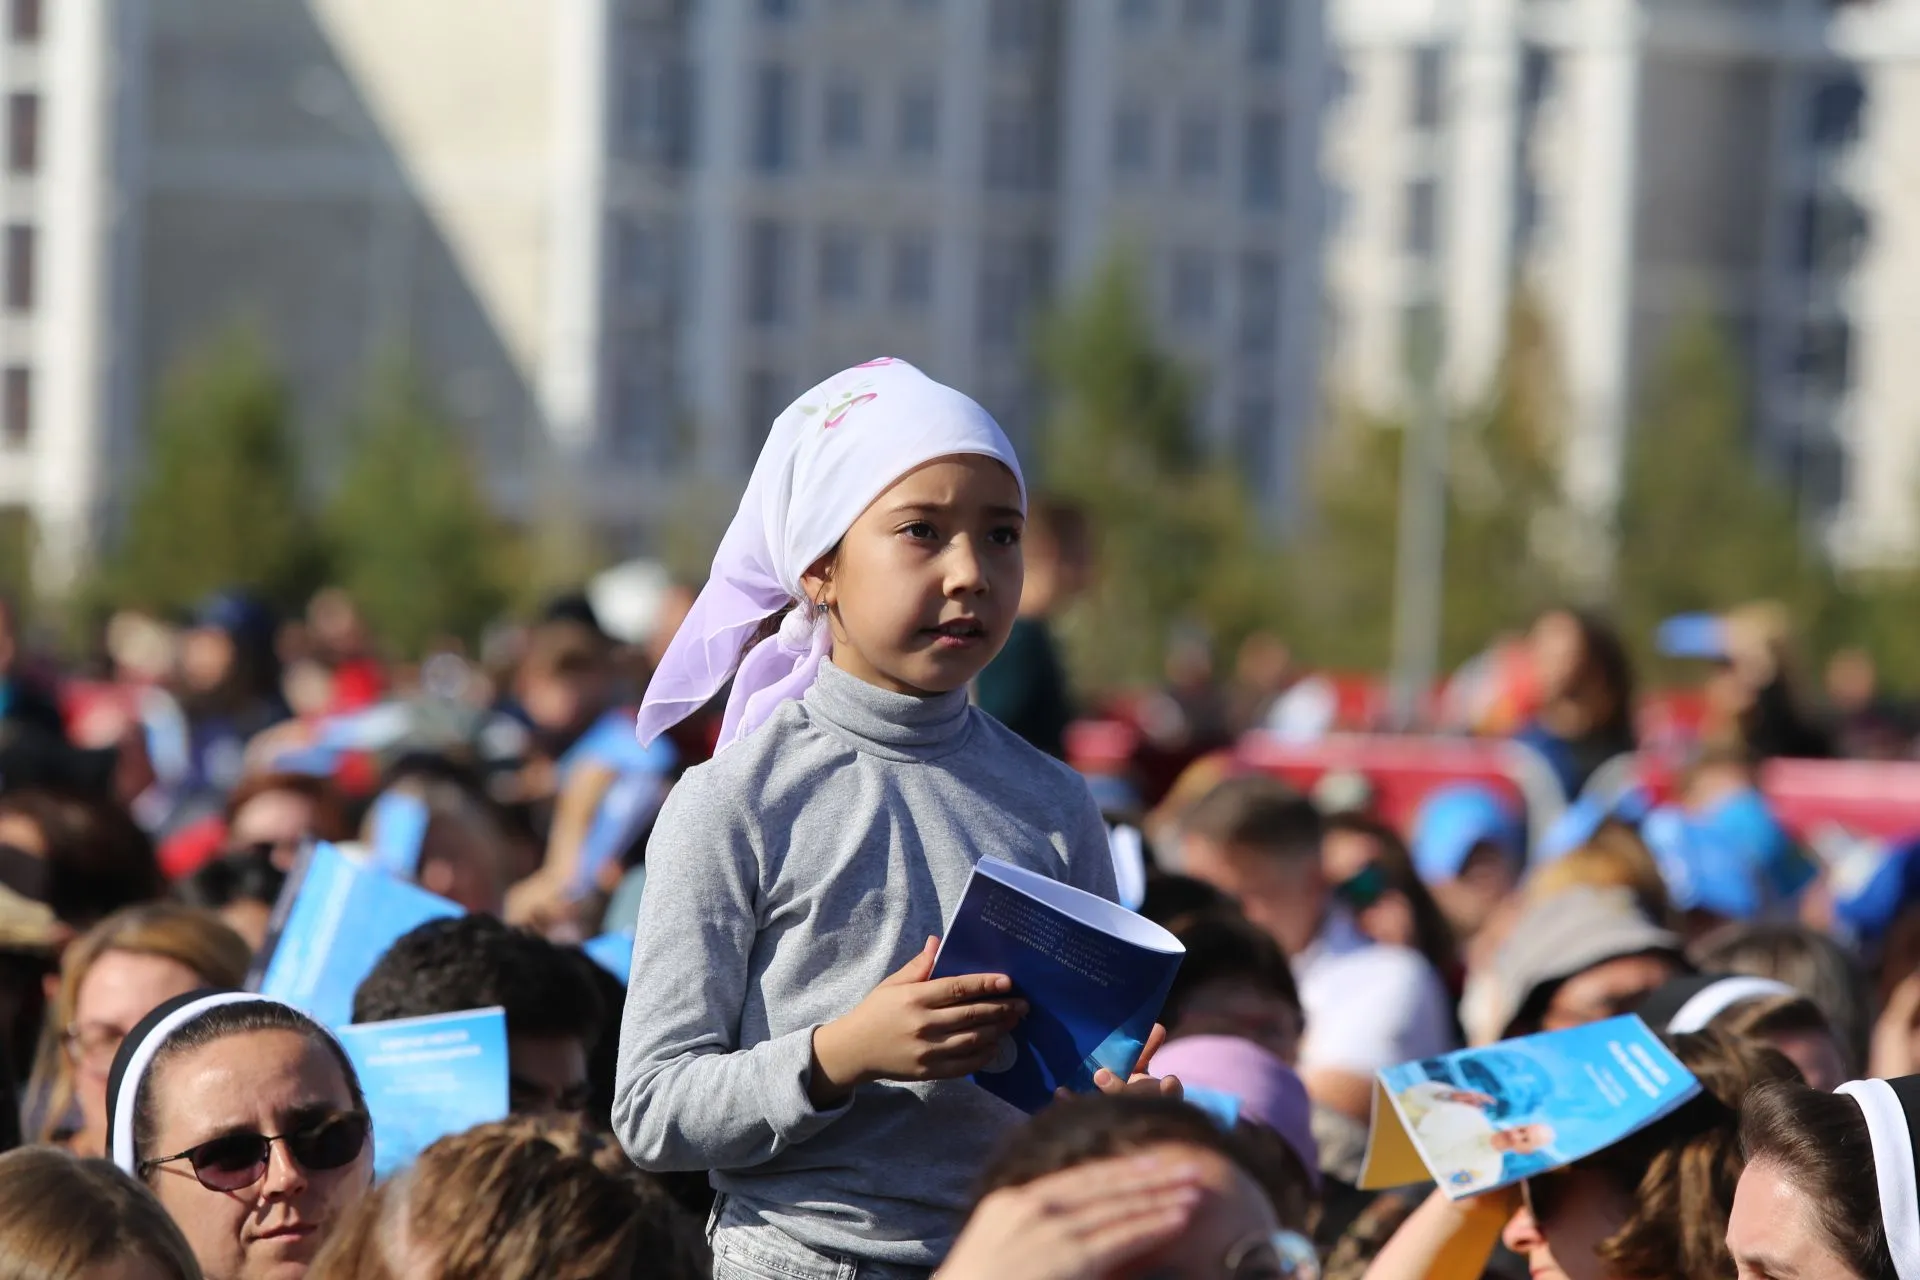 A young girl at a large outdoor Mass celebrated by Pope Francis in Kazakhstan’s capital of Nur-Sultan on Sept. 14, 2022.?w=200&h=150